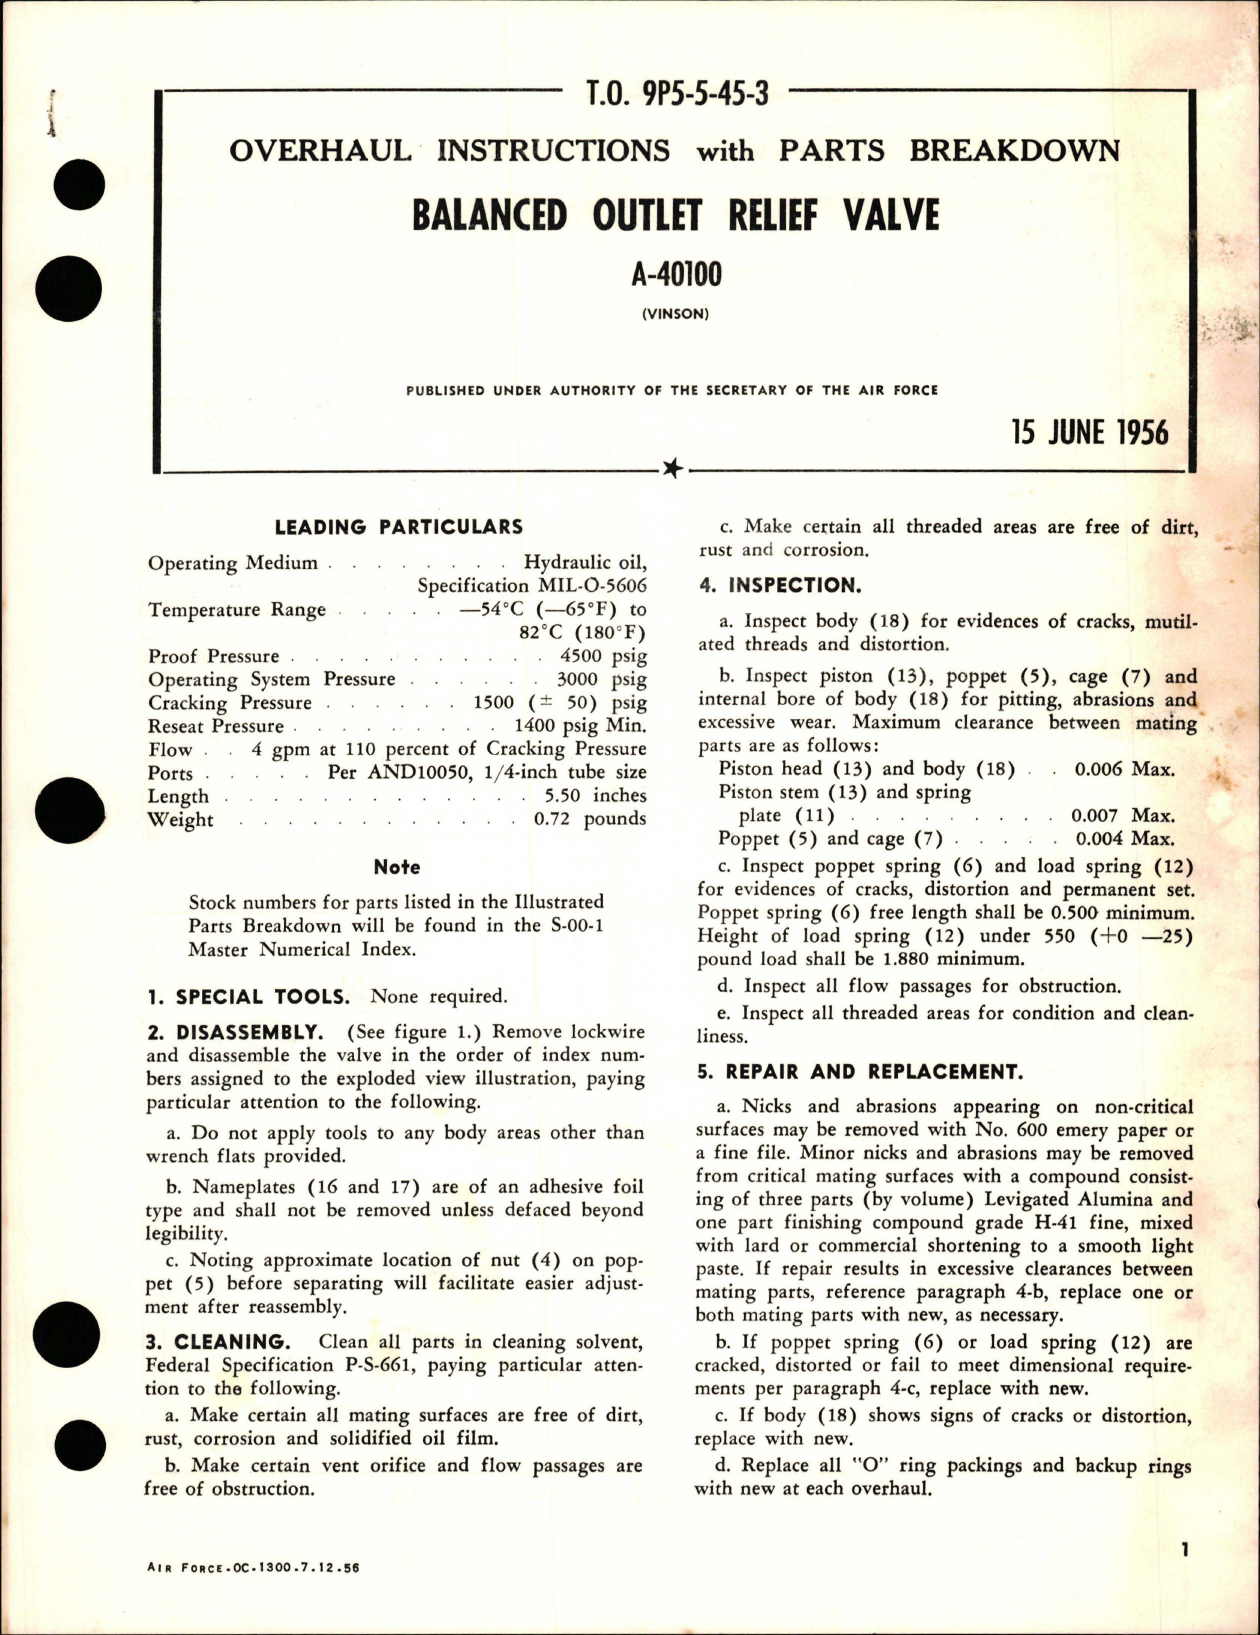 Sample page 1 from AirCorps Library document: Overhaul Instructions with Parts Breakdown for Balanced Outlet Relief Valve - A-40100